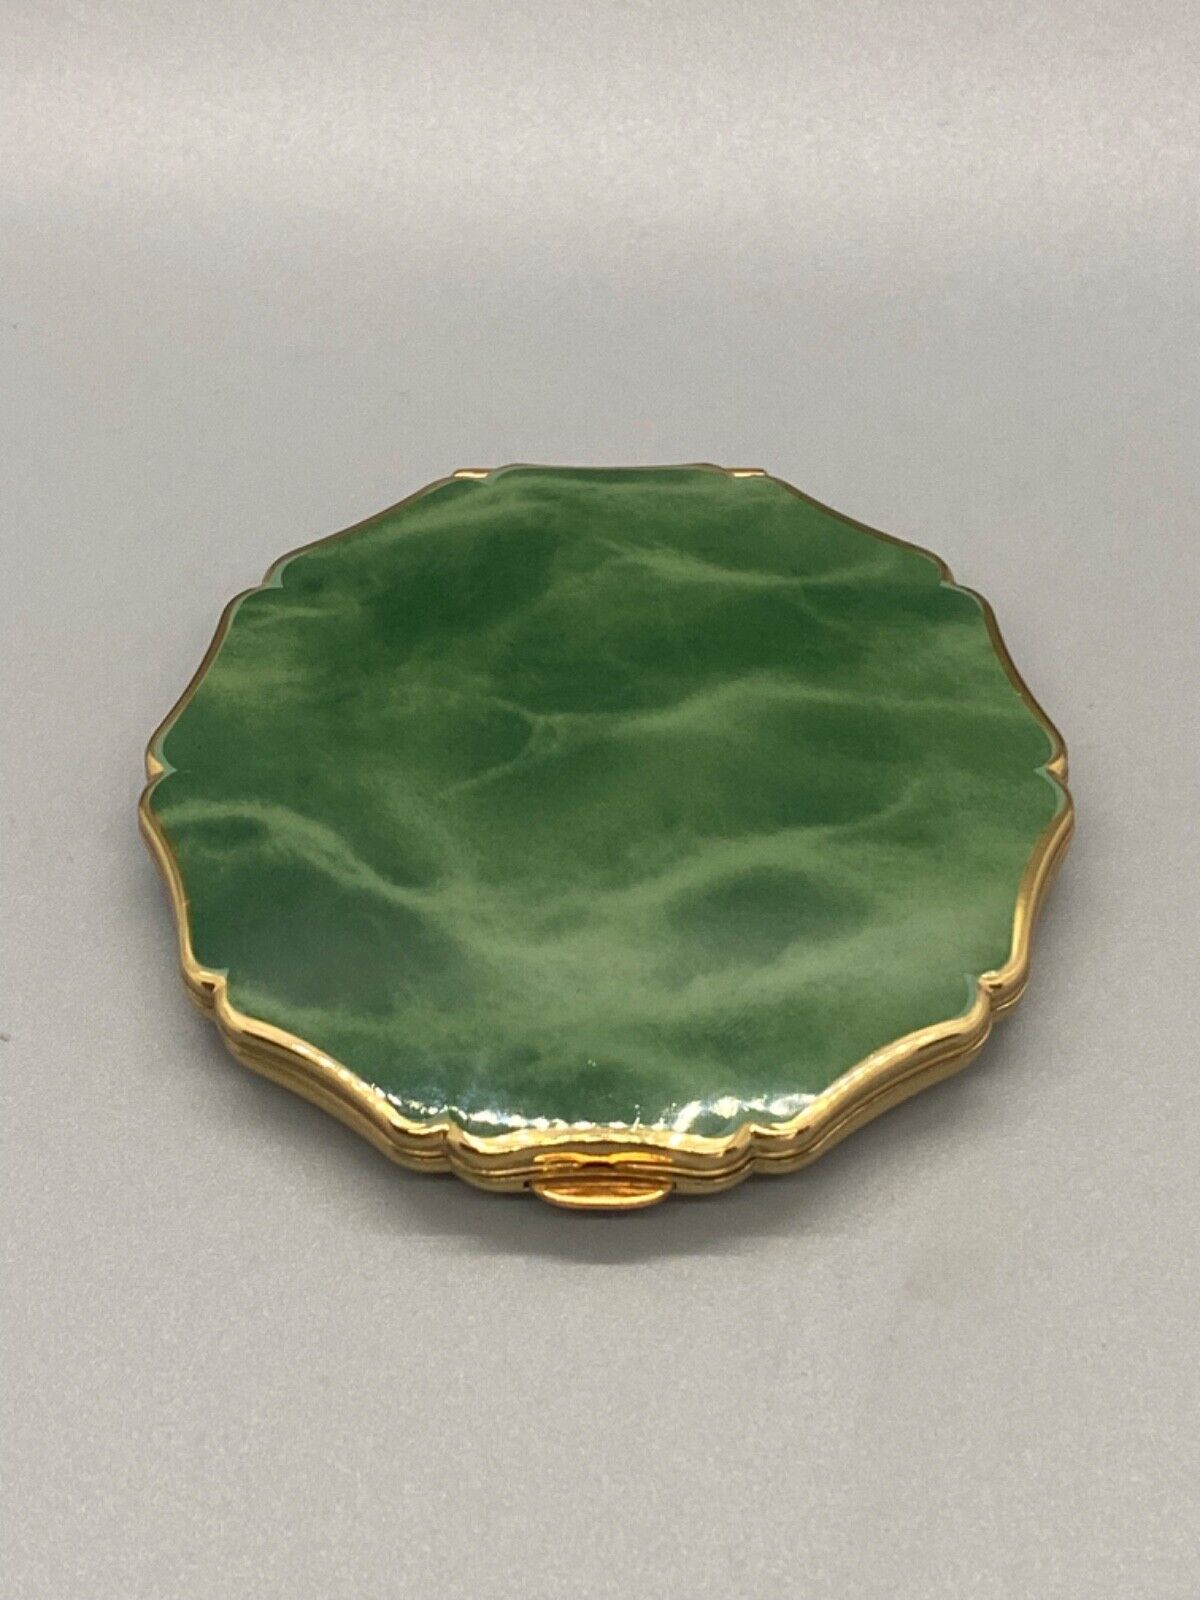 Vtg 1950's Stratton Compact Green Gold Mirror 1950's Vanity Pat 764125 Gorgeous